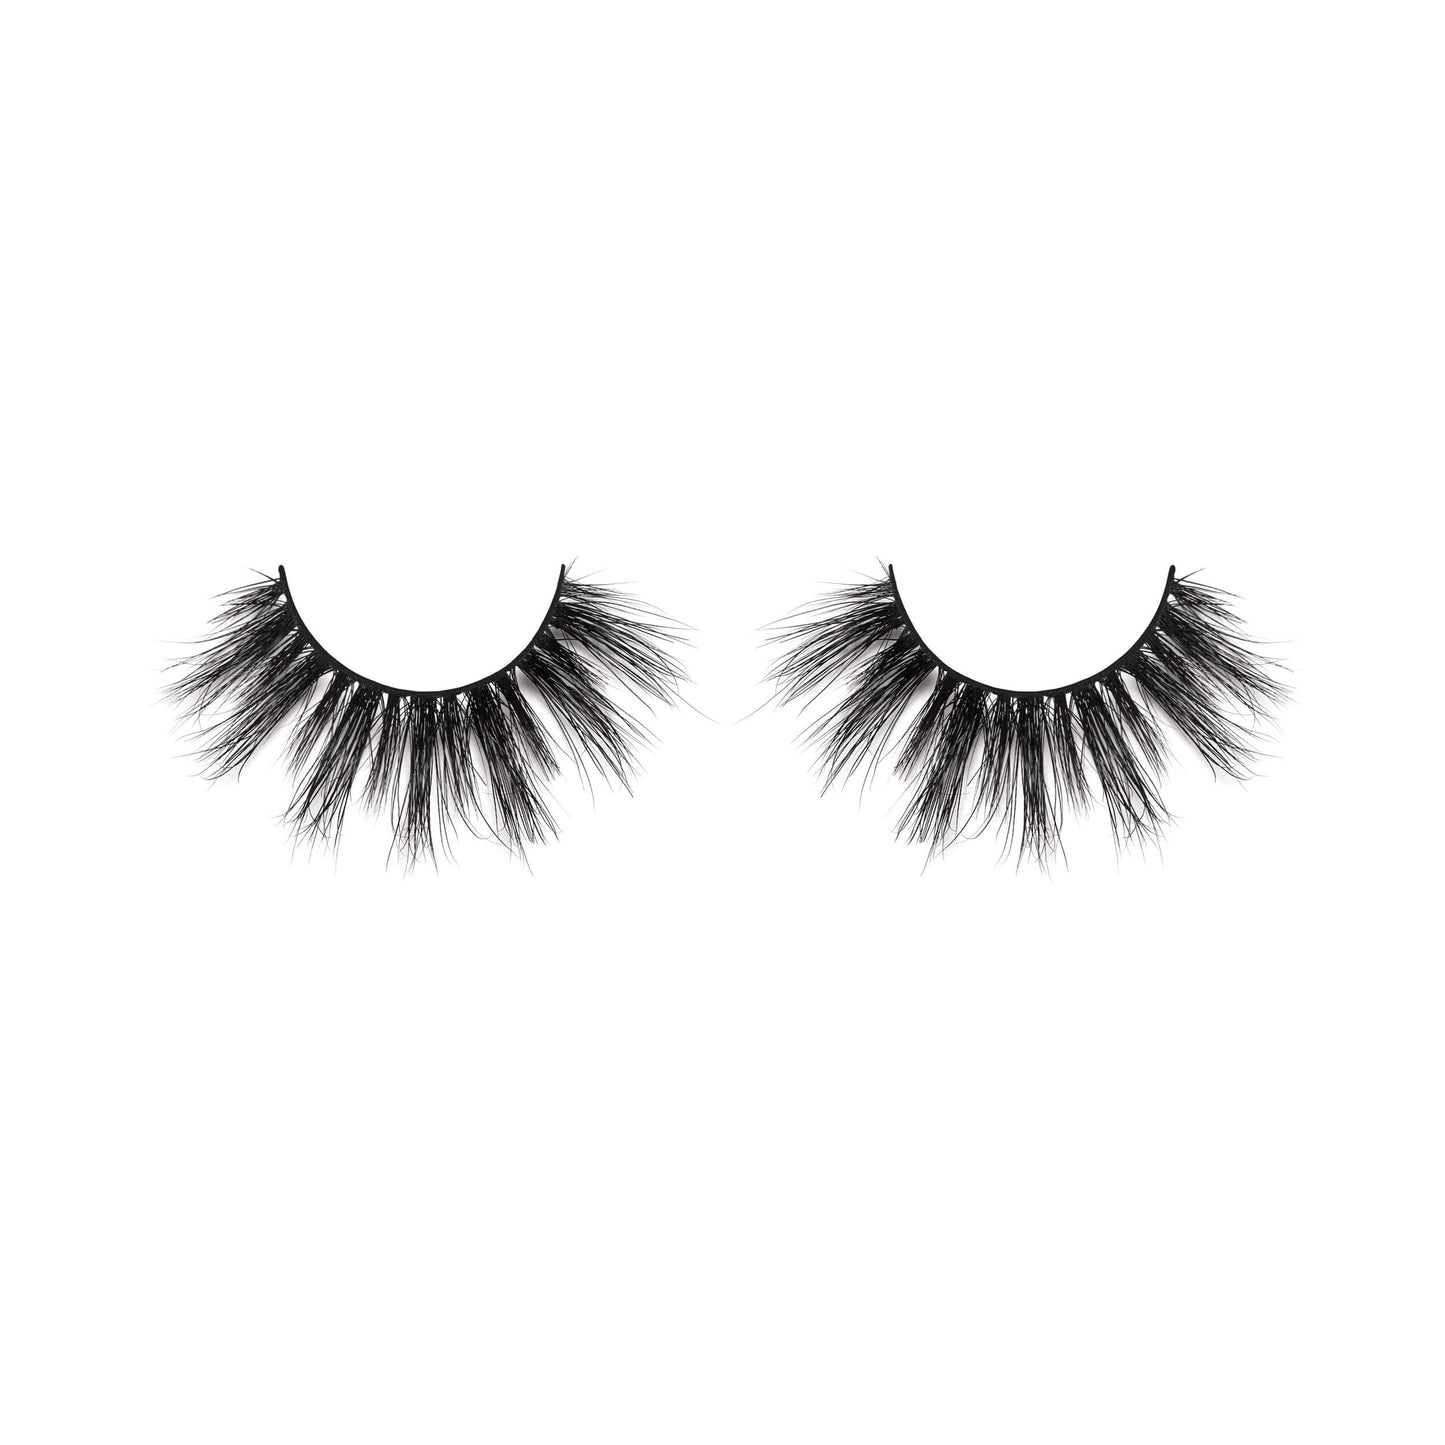 Lilly Lashes "So Extra" 3D Mink Lashes